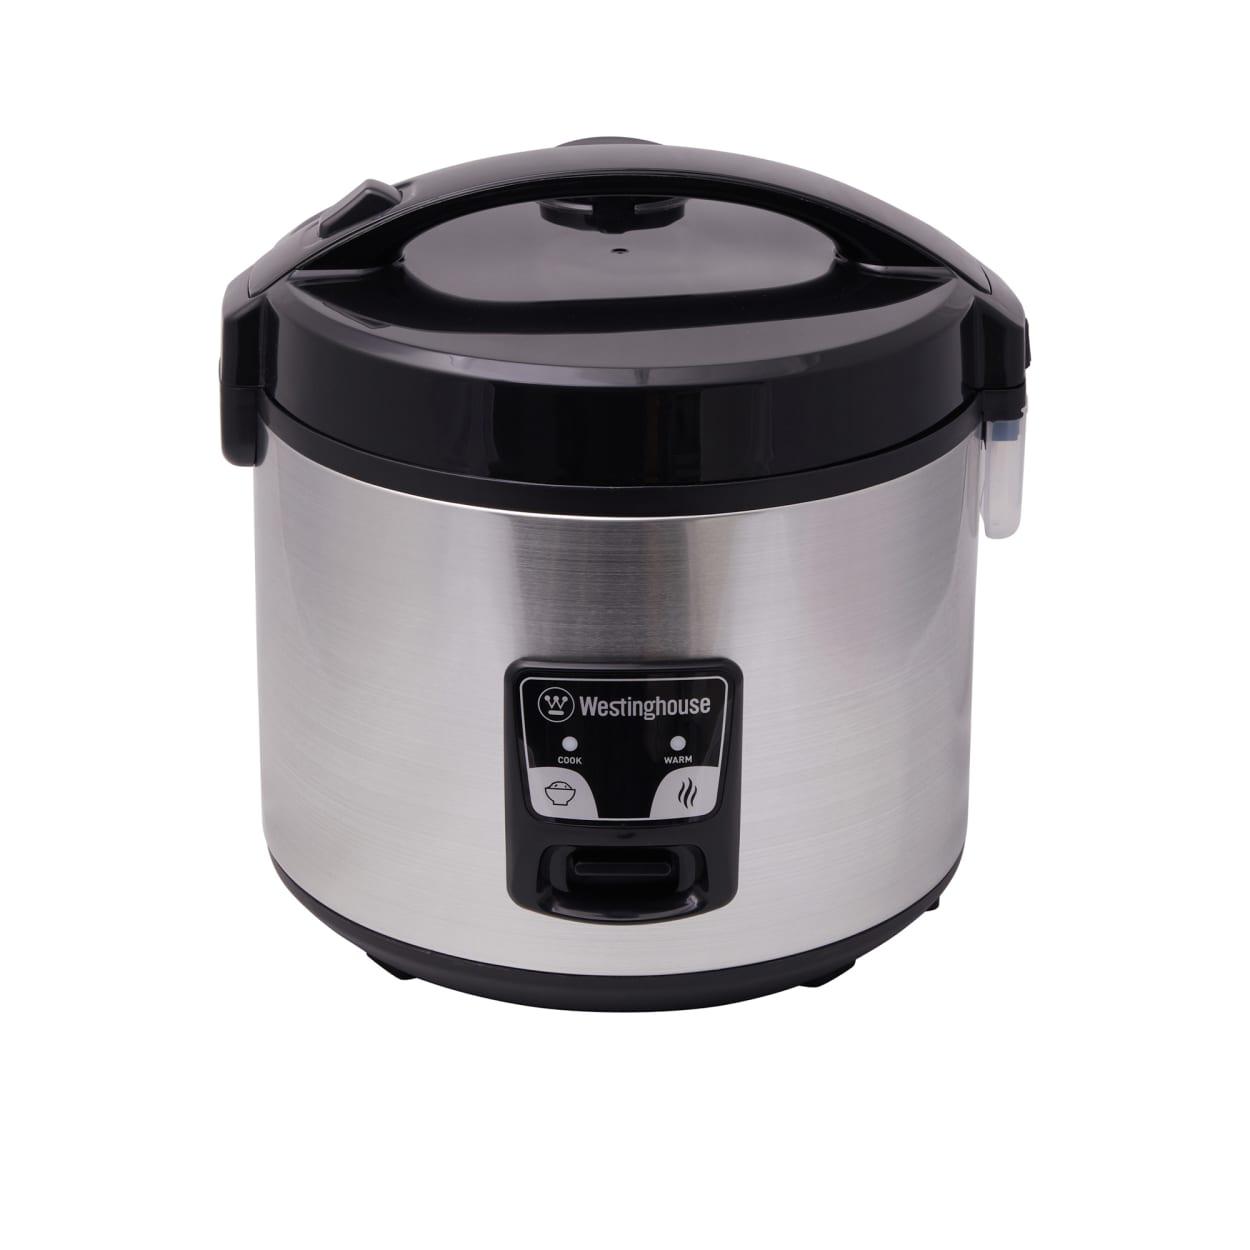 Westinghouse Rice Cooker 10 Cup Image 3